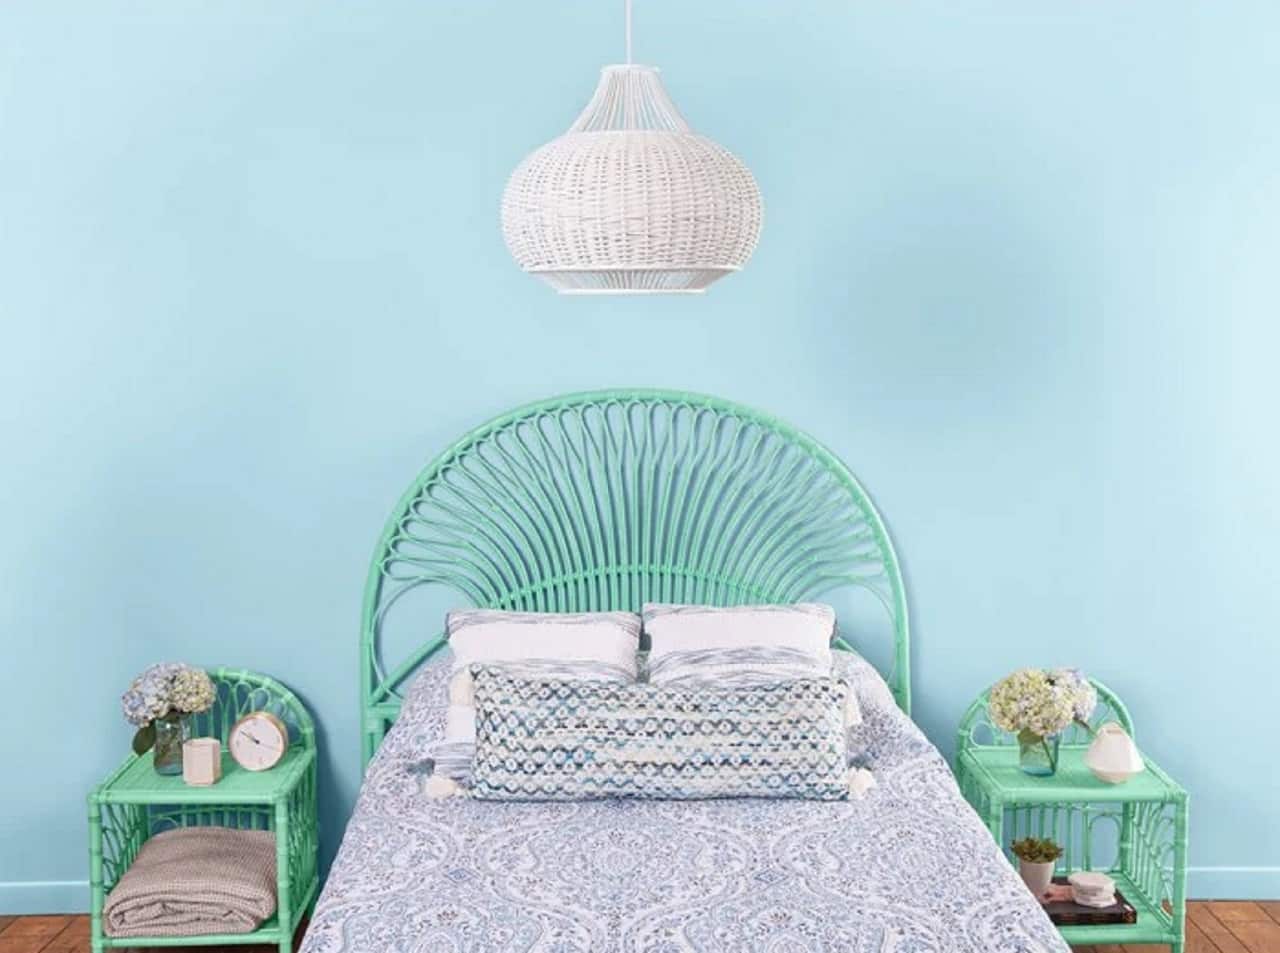 Classic bedroom with mild blue accent wall and turquoise furniture as well as nice weaved sconce over the bed